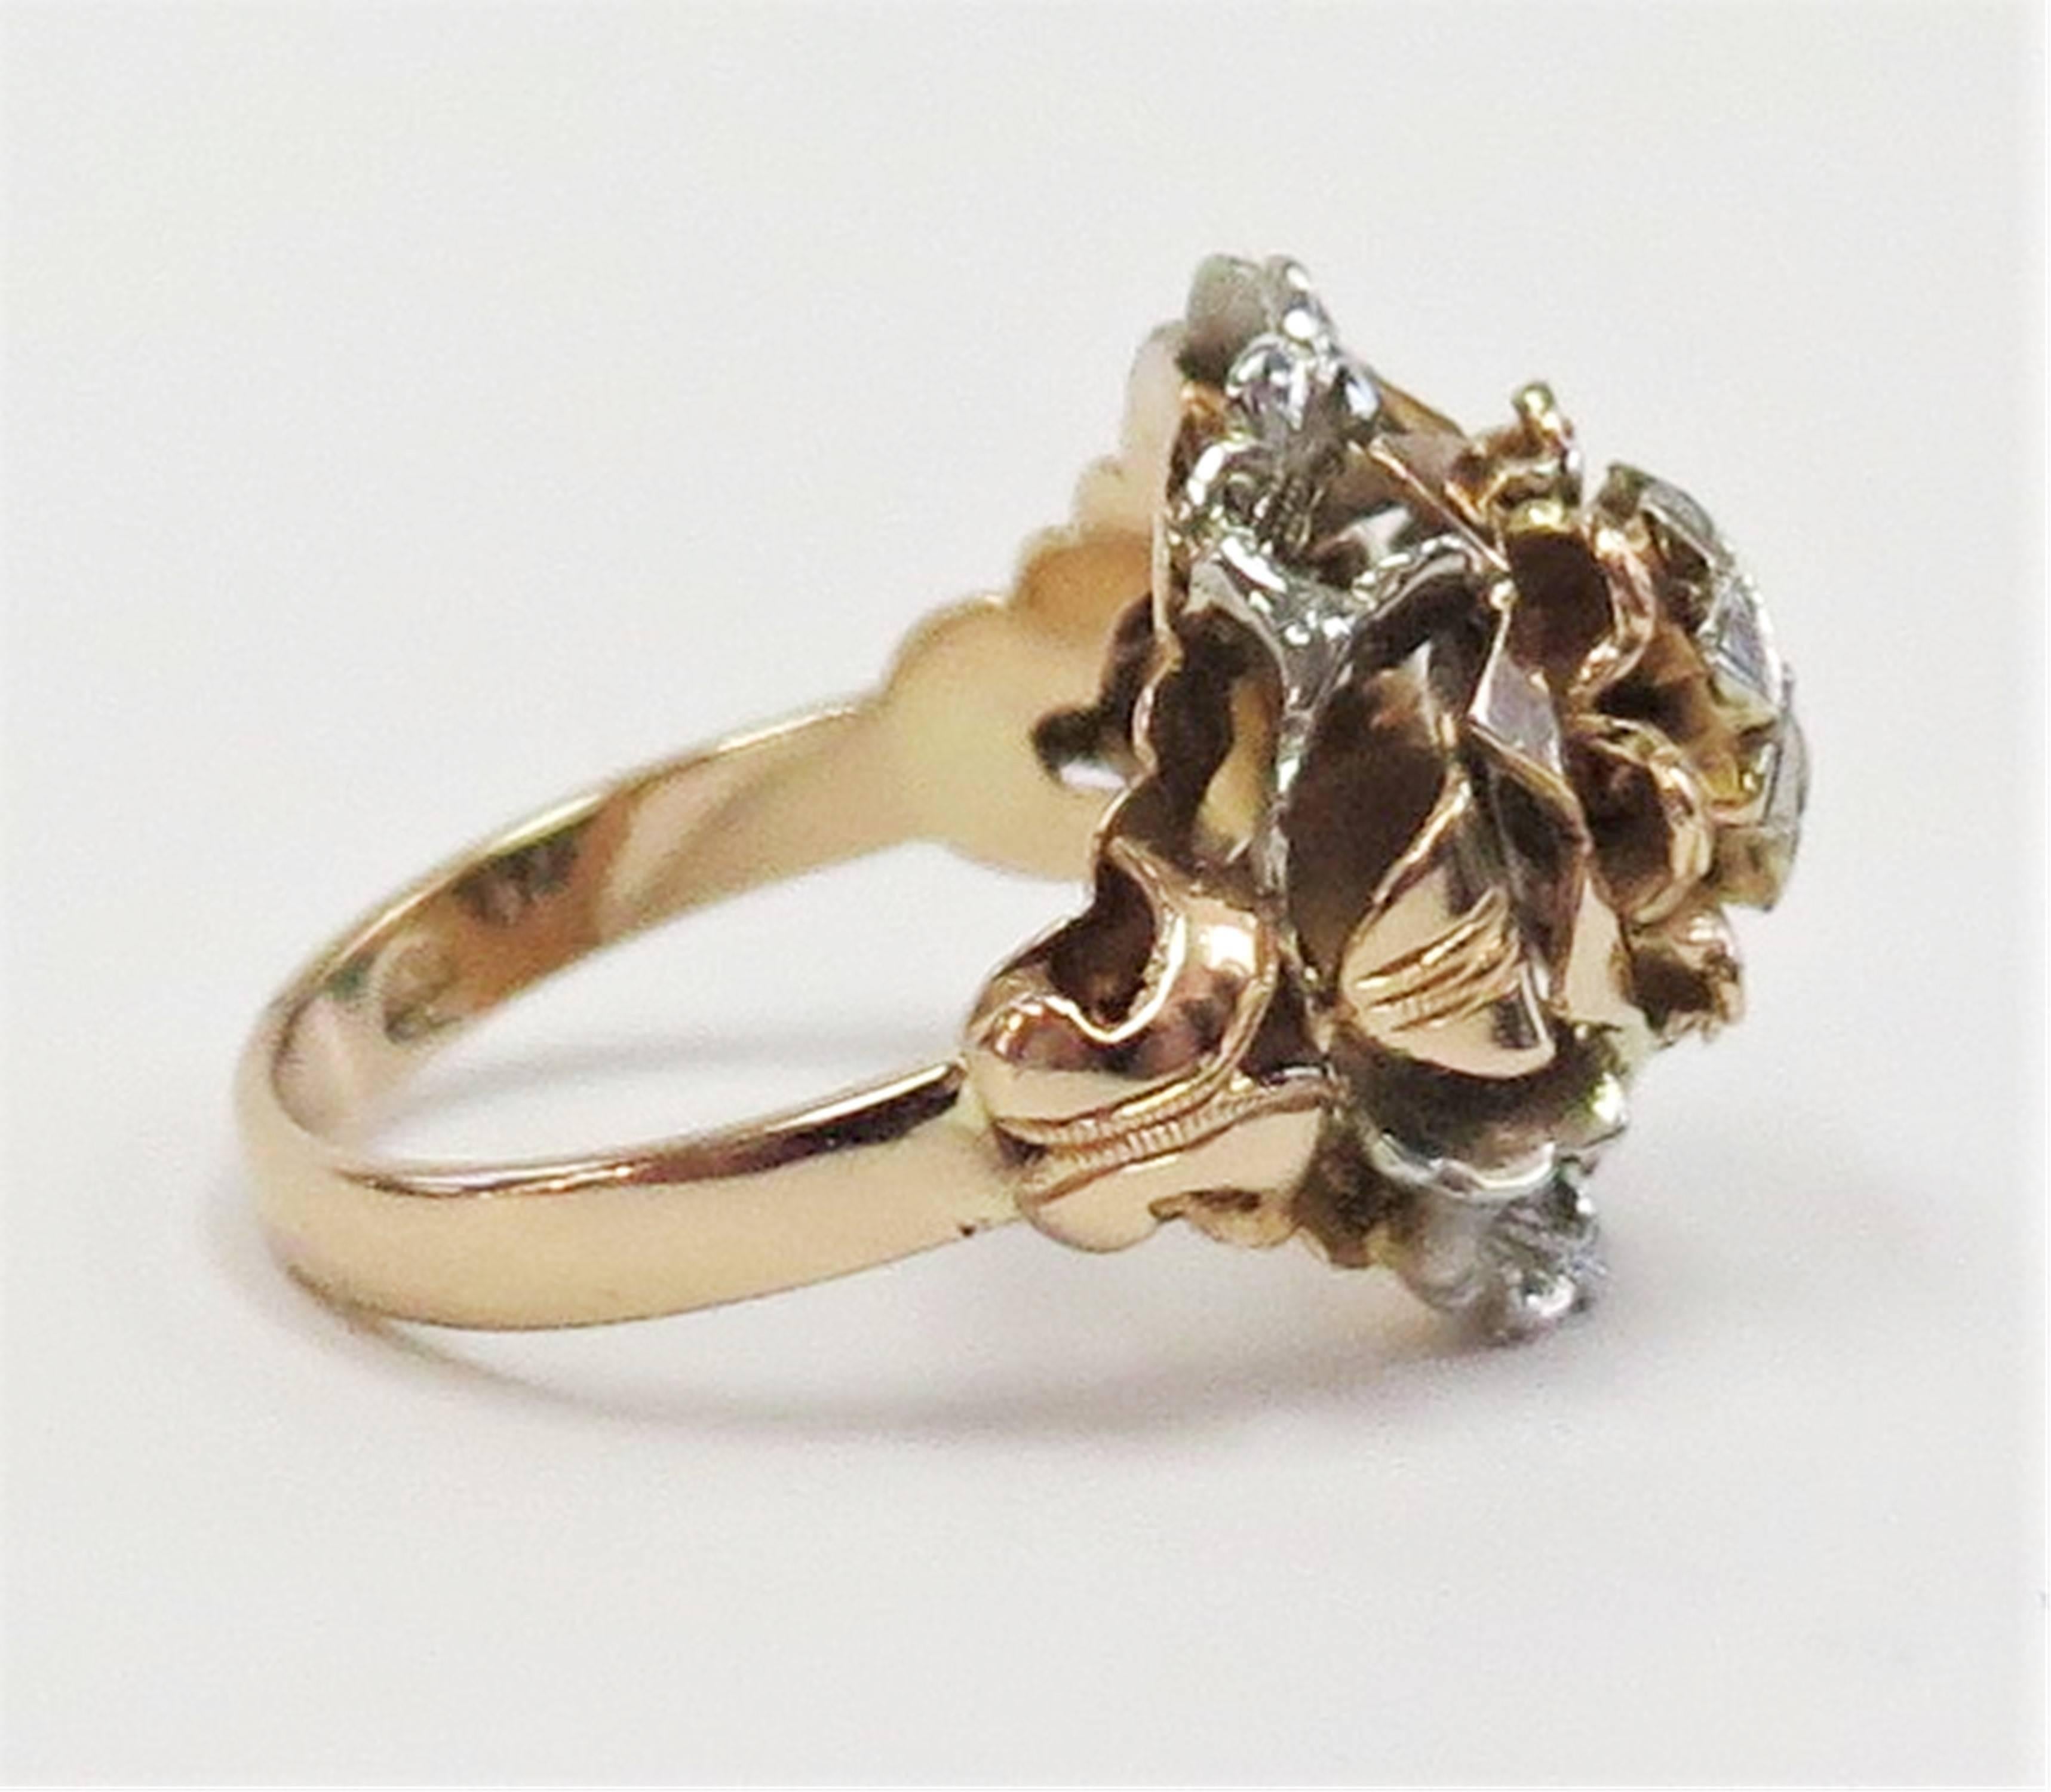 This is a unique 1920s Etruscan Revival Rose Cut Diamond centered statement ring.  It is a gorgeous ornate design in 18 karat vibrant rose gold with white gold trim. The intricate craftmanship is noteworthy.

Size 8 - we can size it for you.
2.5 mm